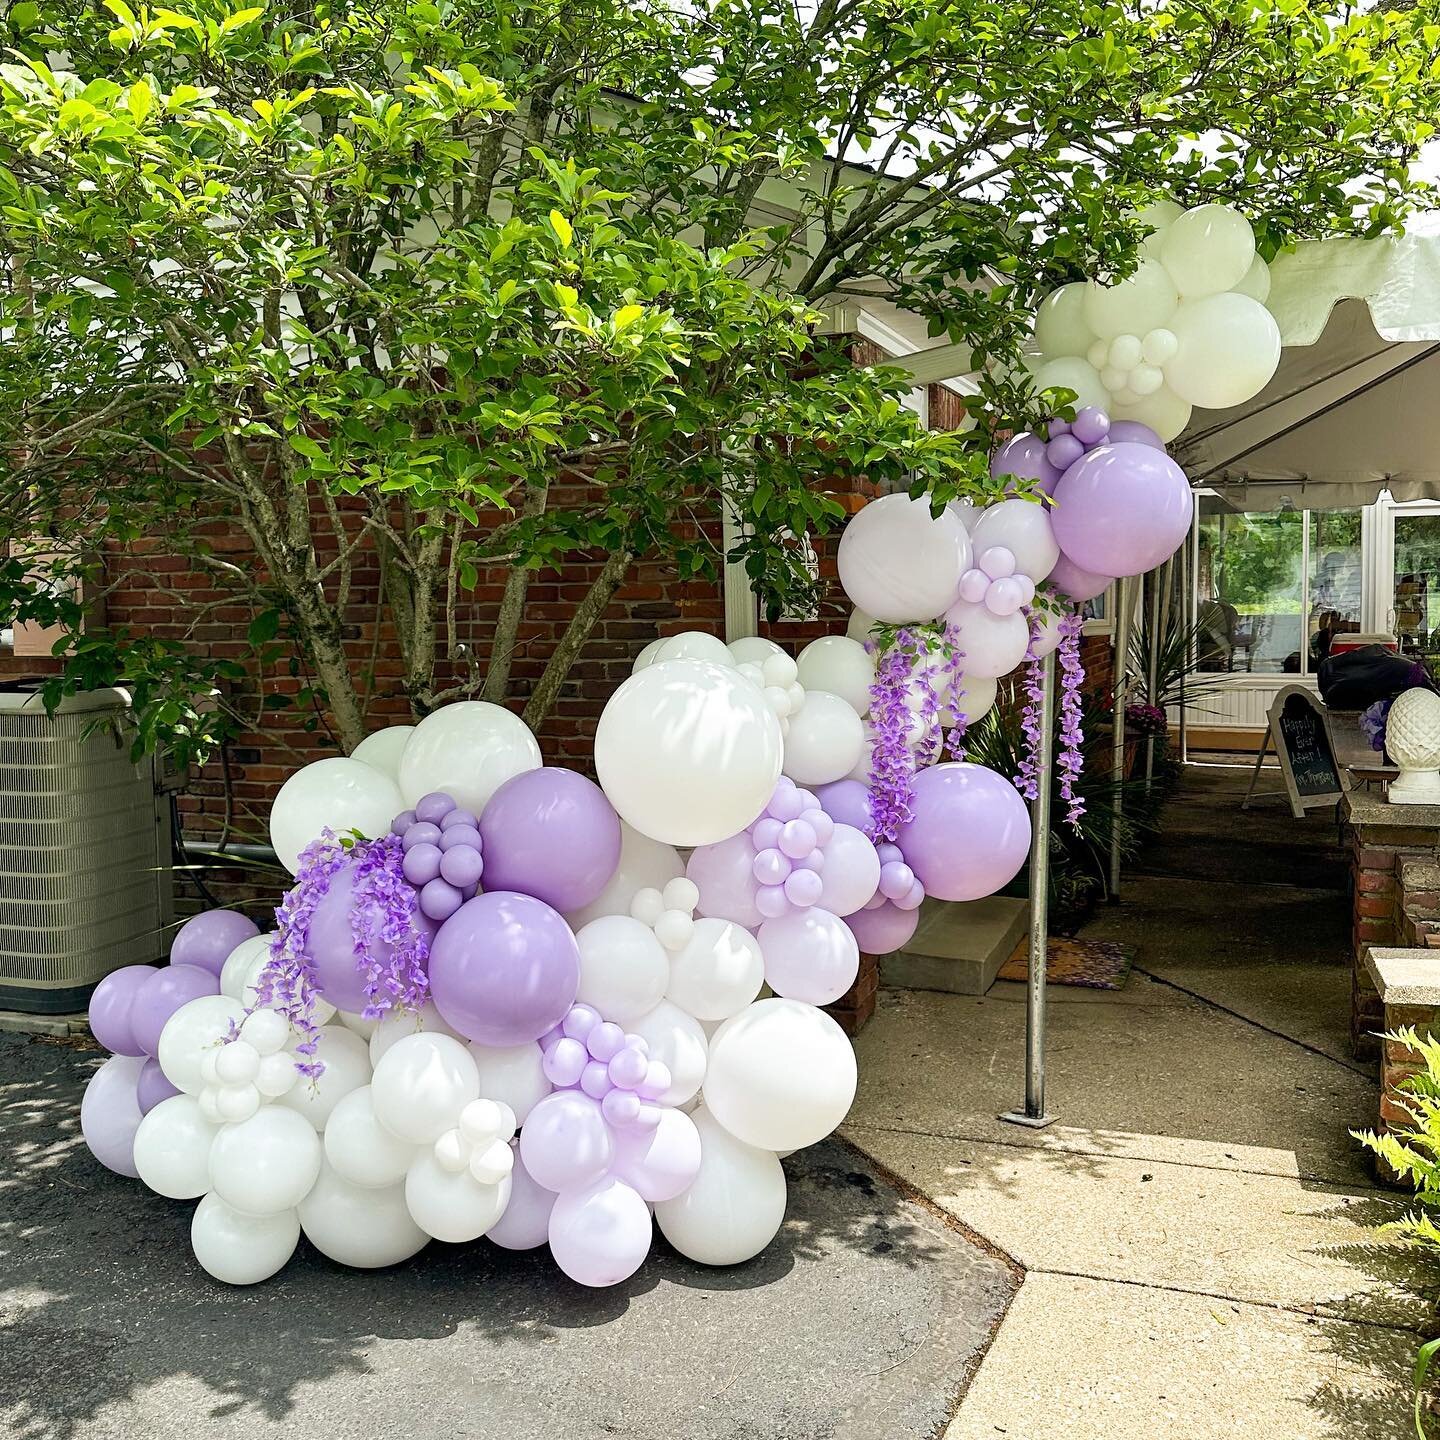 Weddings + Balloons are a MATCH MADE in heaven ✨

Cannot get over how this all came together!! Our client had a few things she wanted covered up near the reception tent and voila, balloons elevated it all 🤍

#inflatelouisville#louisvilleballoons#lou